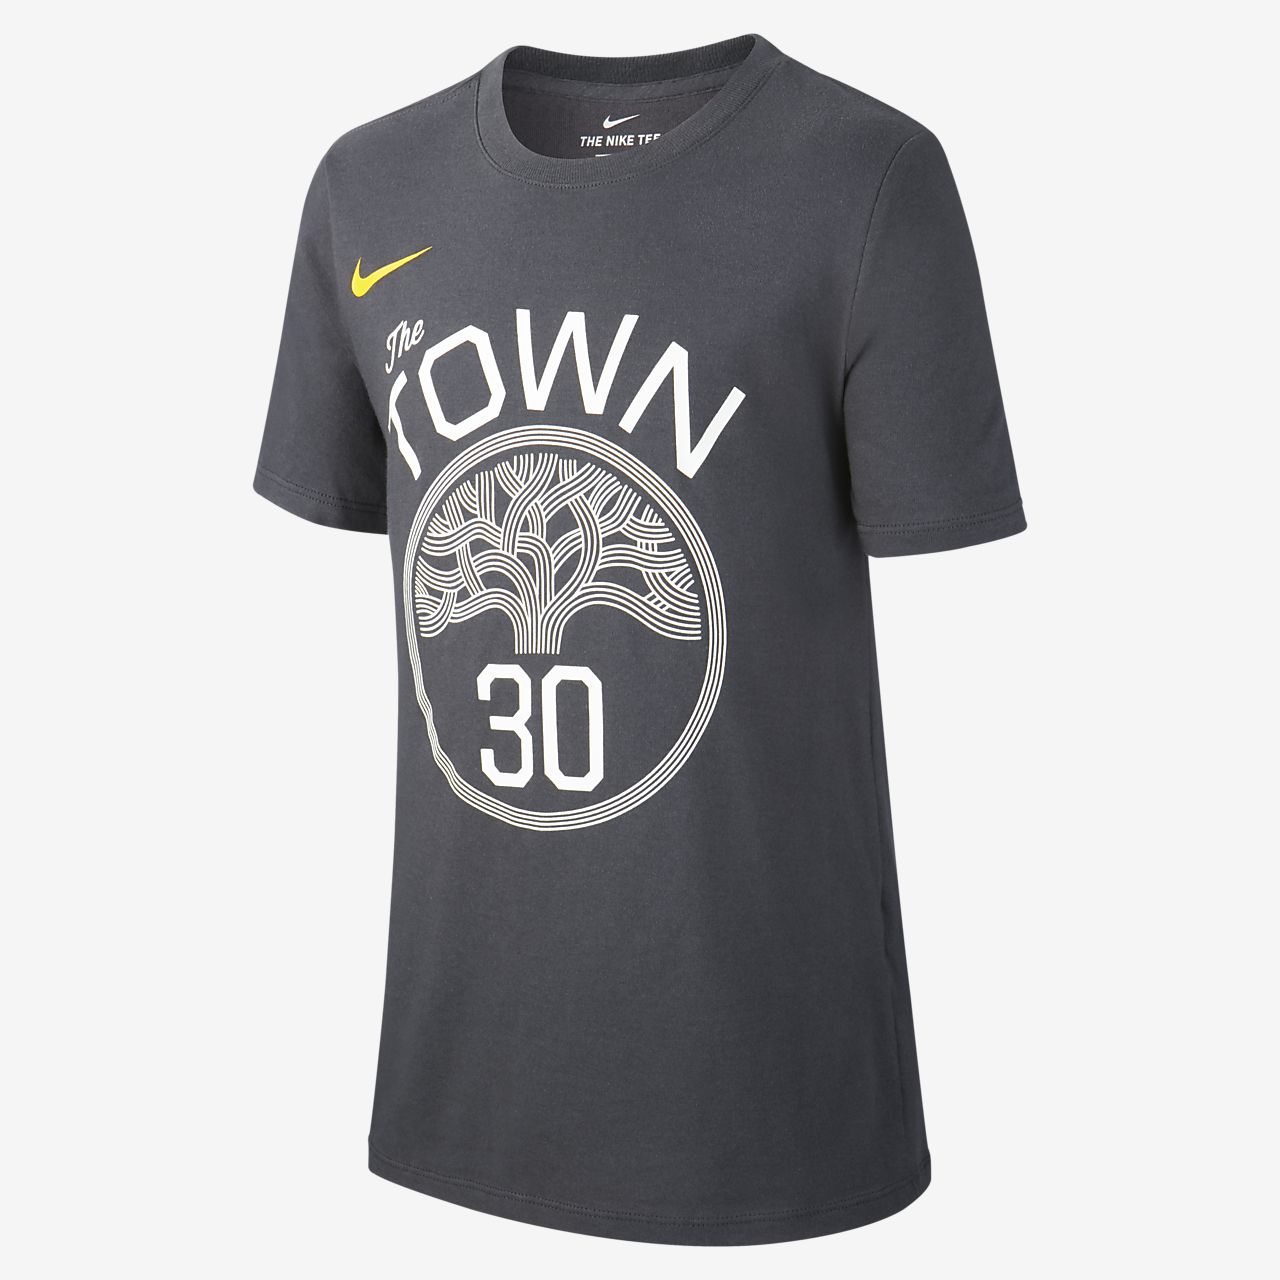 golden state curry t shirt